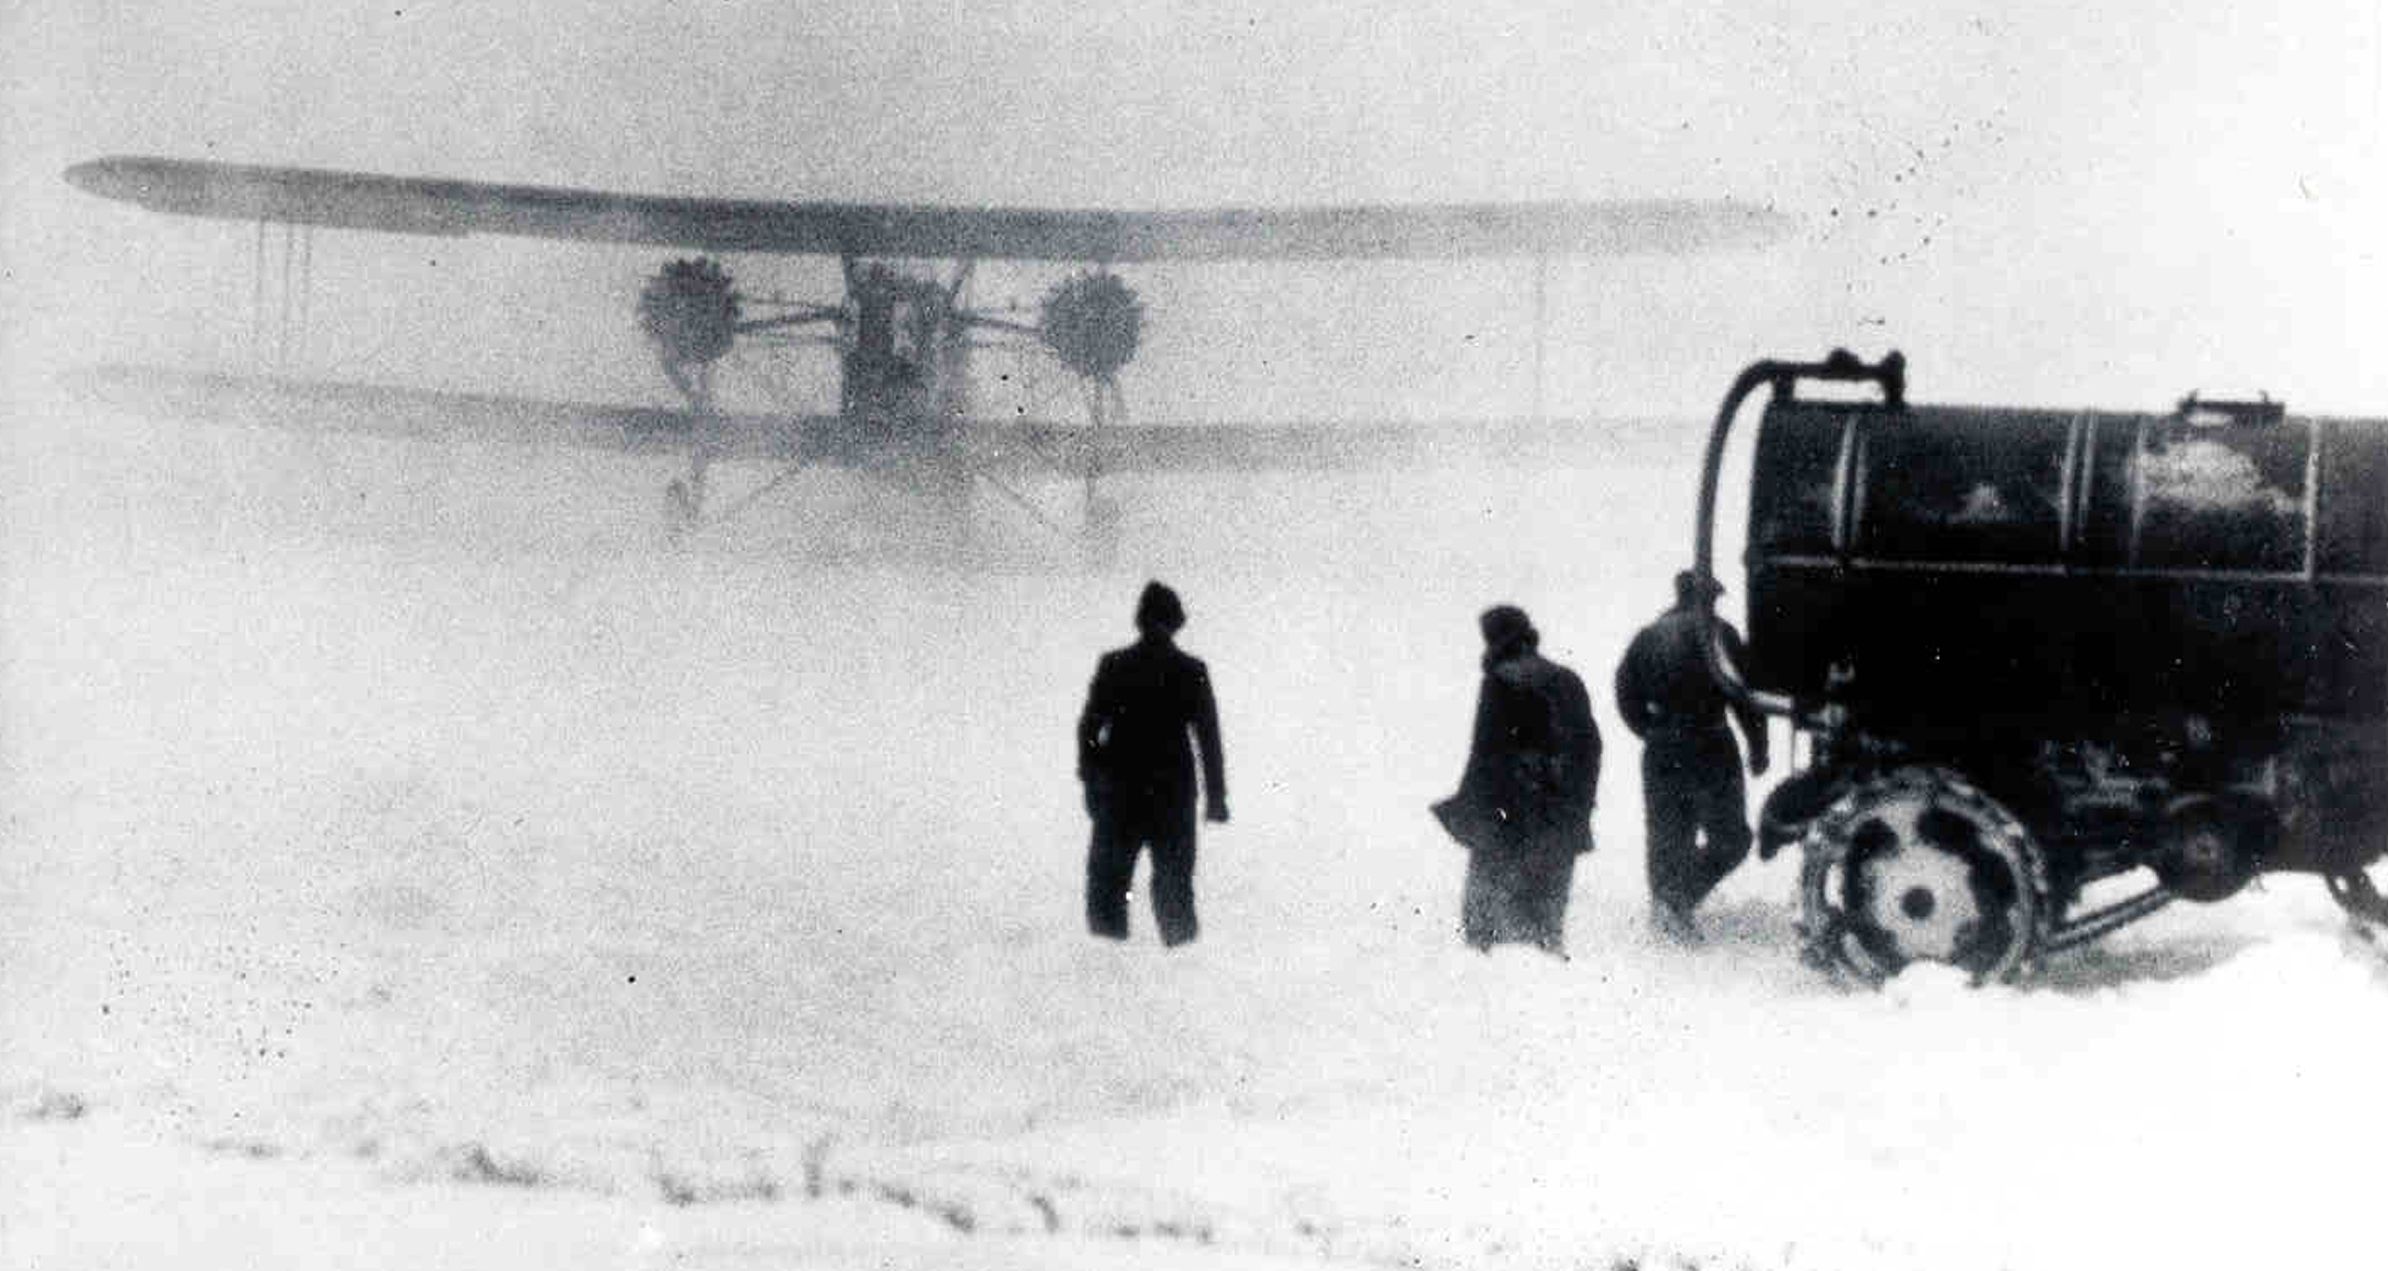  An Army Air Corps de Havilland twin-engine airmail plane in snowstorm 